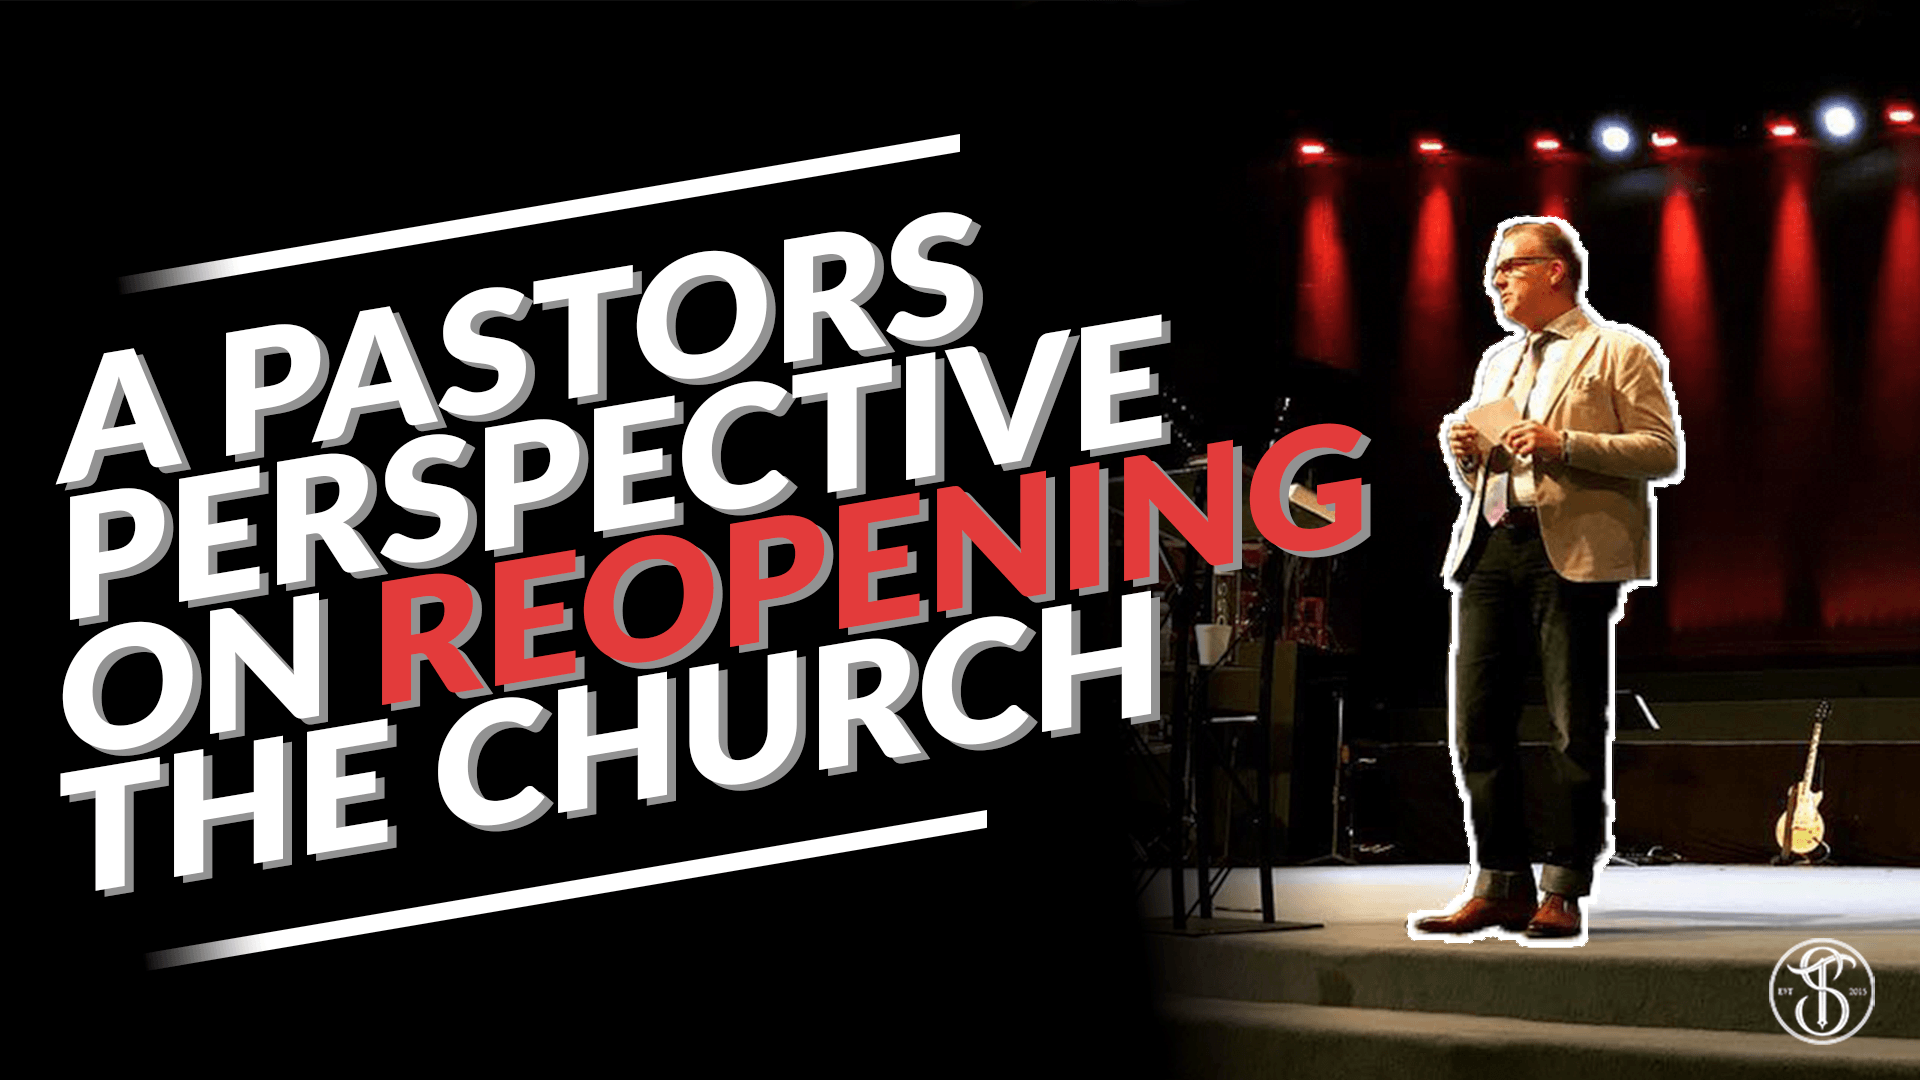 A Pastor’s Perspective on Reopening the Church